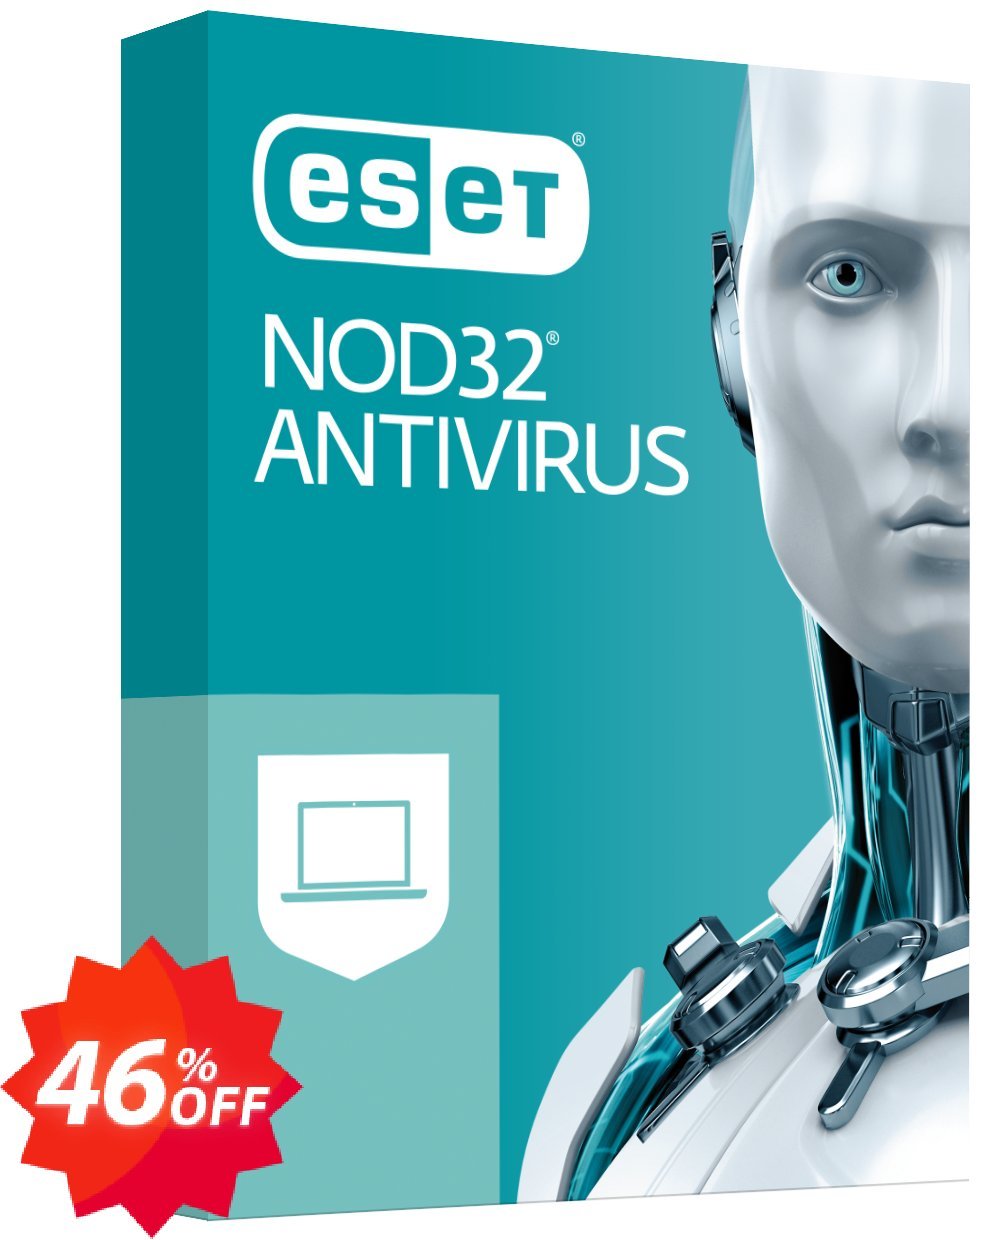 ESET NOD32 Antivirus -  Yearly 3 Devices Coupon code 46% discount 